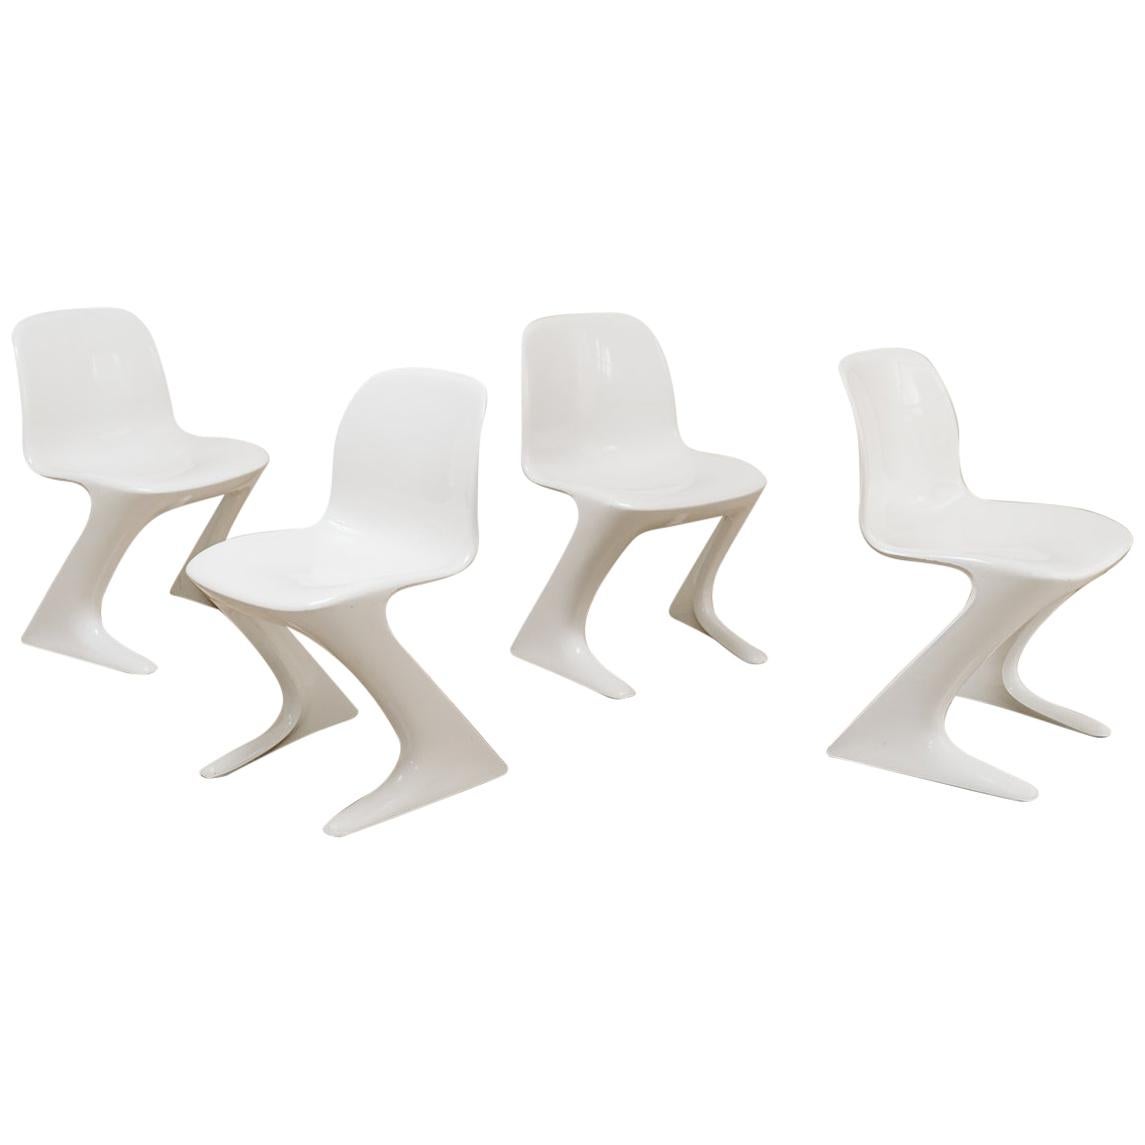 4 White Kangaroo Chairs by Ernst Moeckl